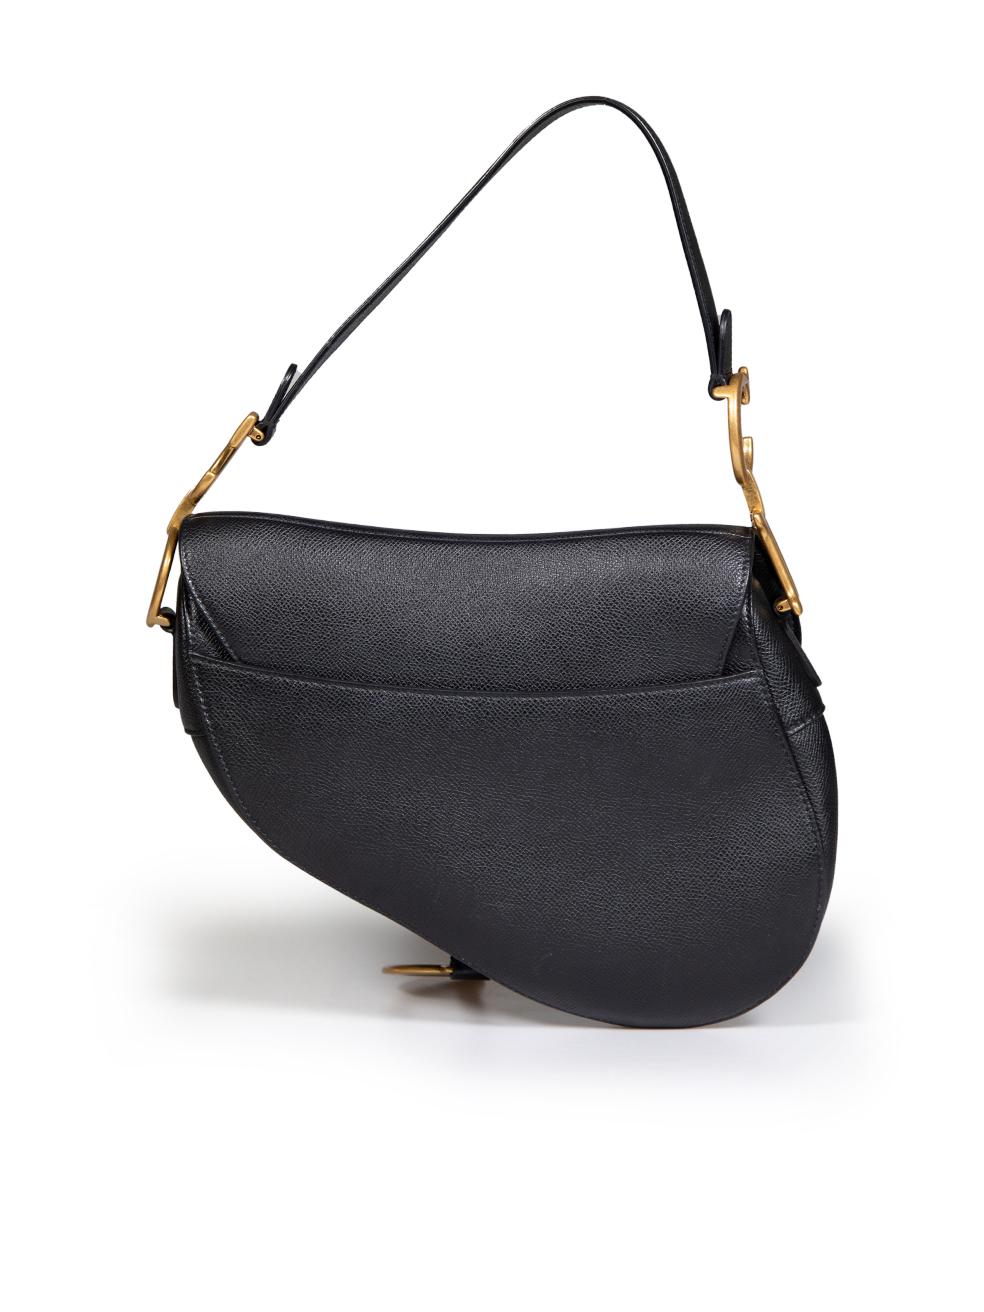 Dior Black Calfskin Saddle Bag In Excellent Condition For Sale In London, GB